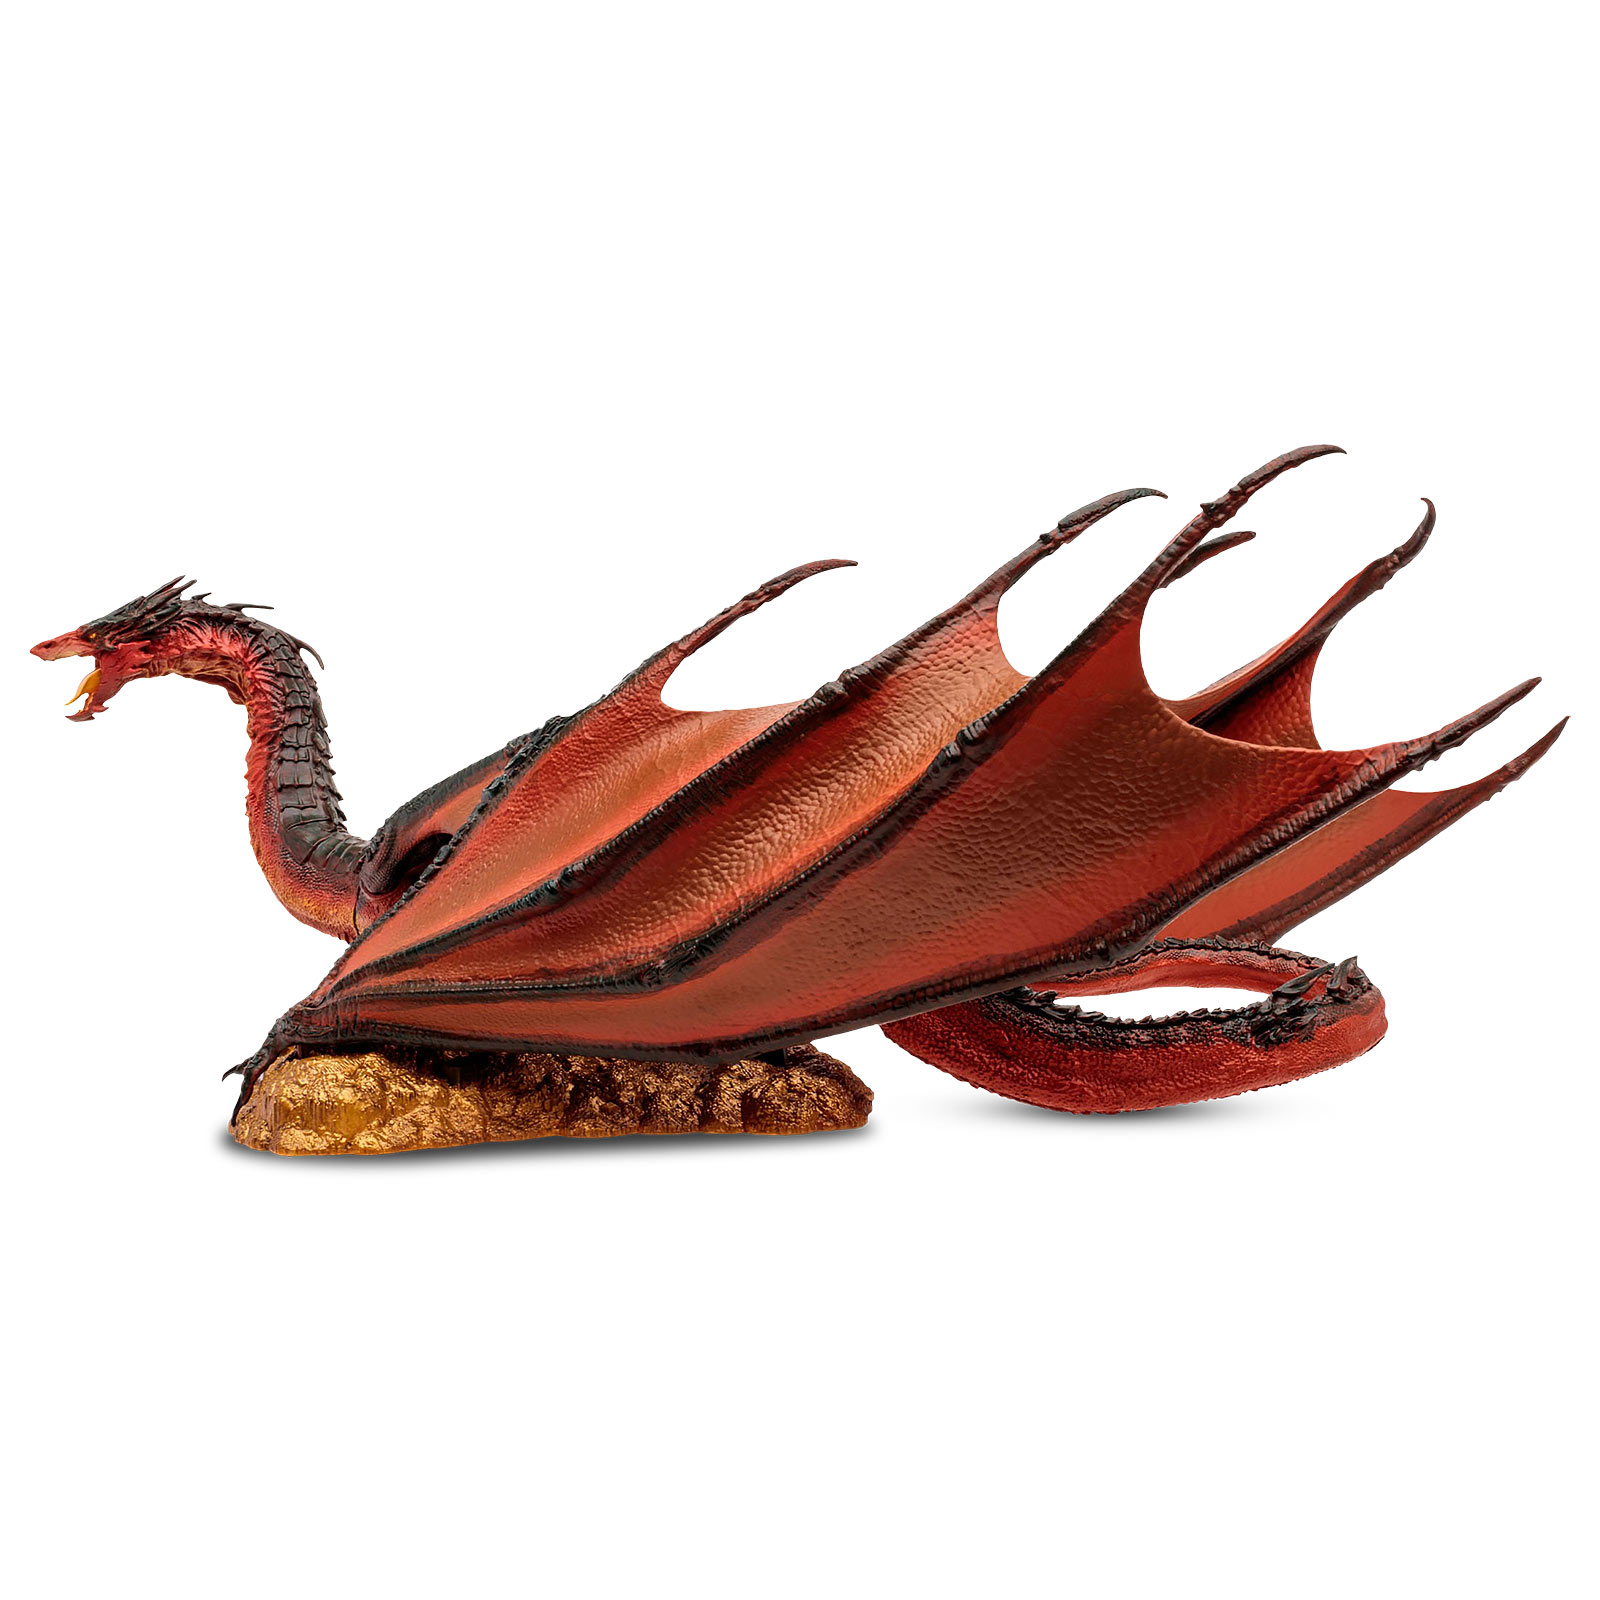 Lord of the Rings - Smaug Figure